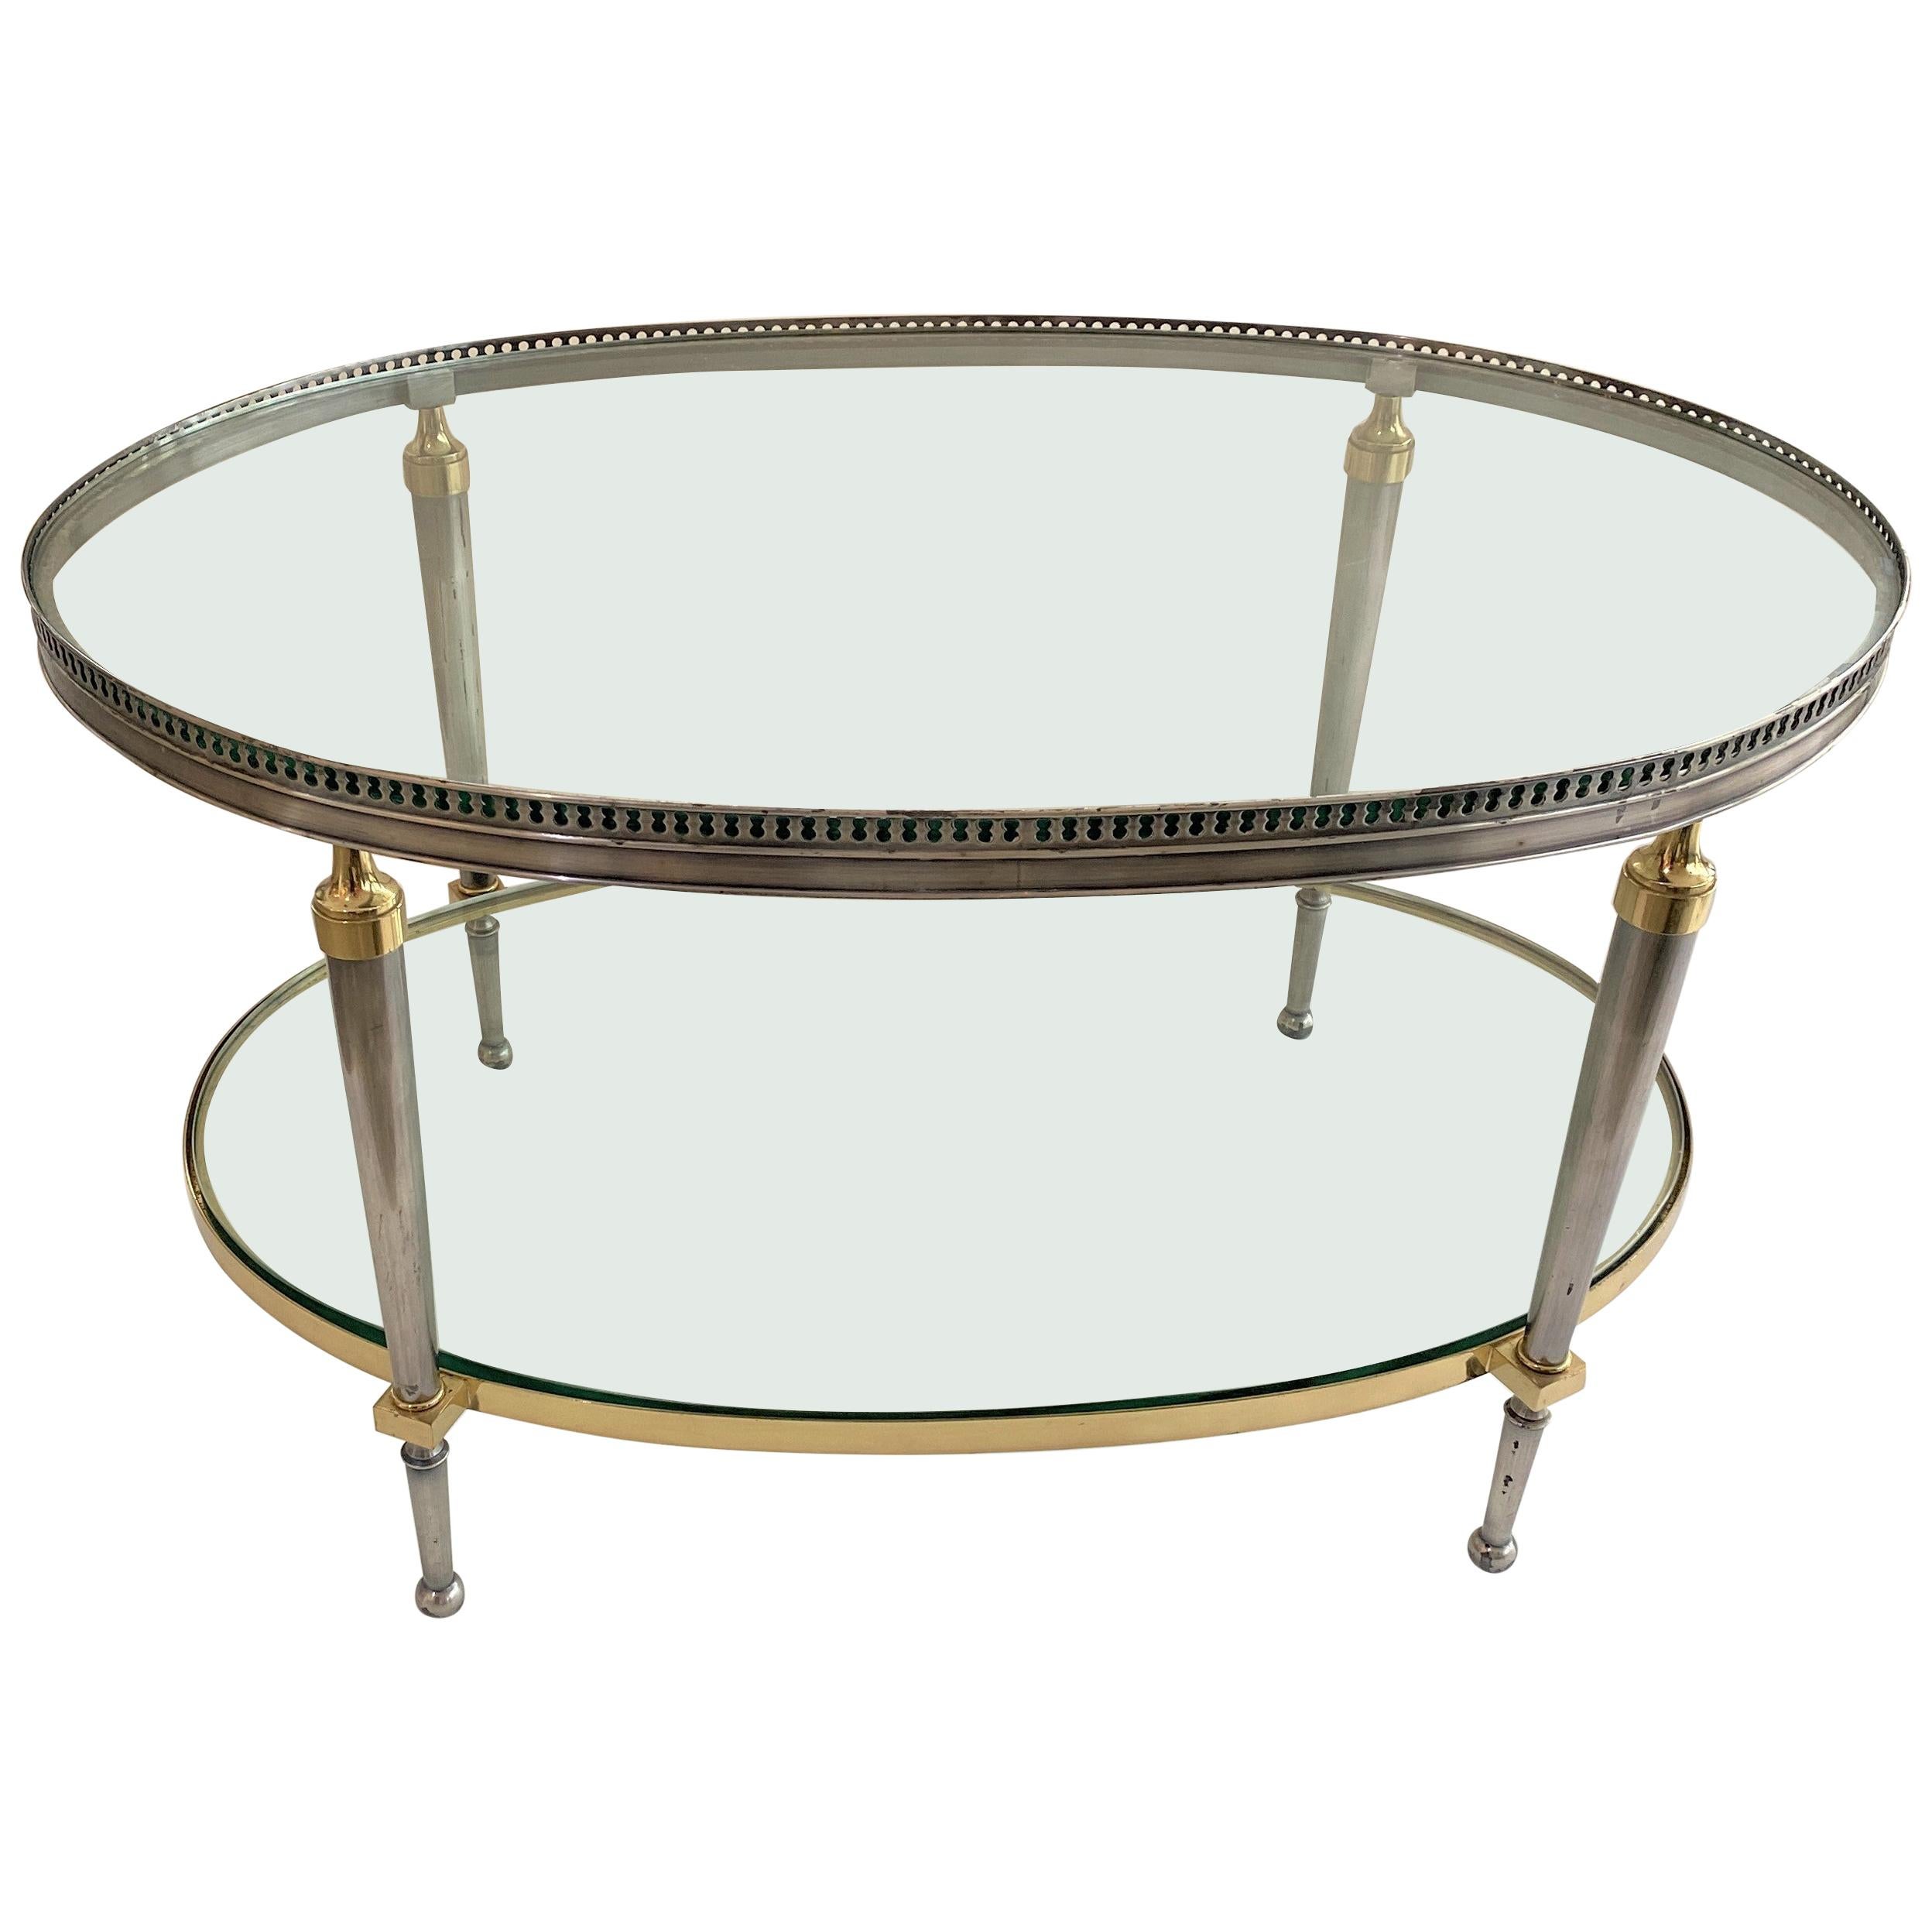 Trouvailles Steel and Brass Oval Cocktail Table